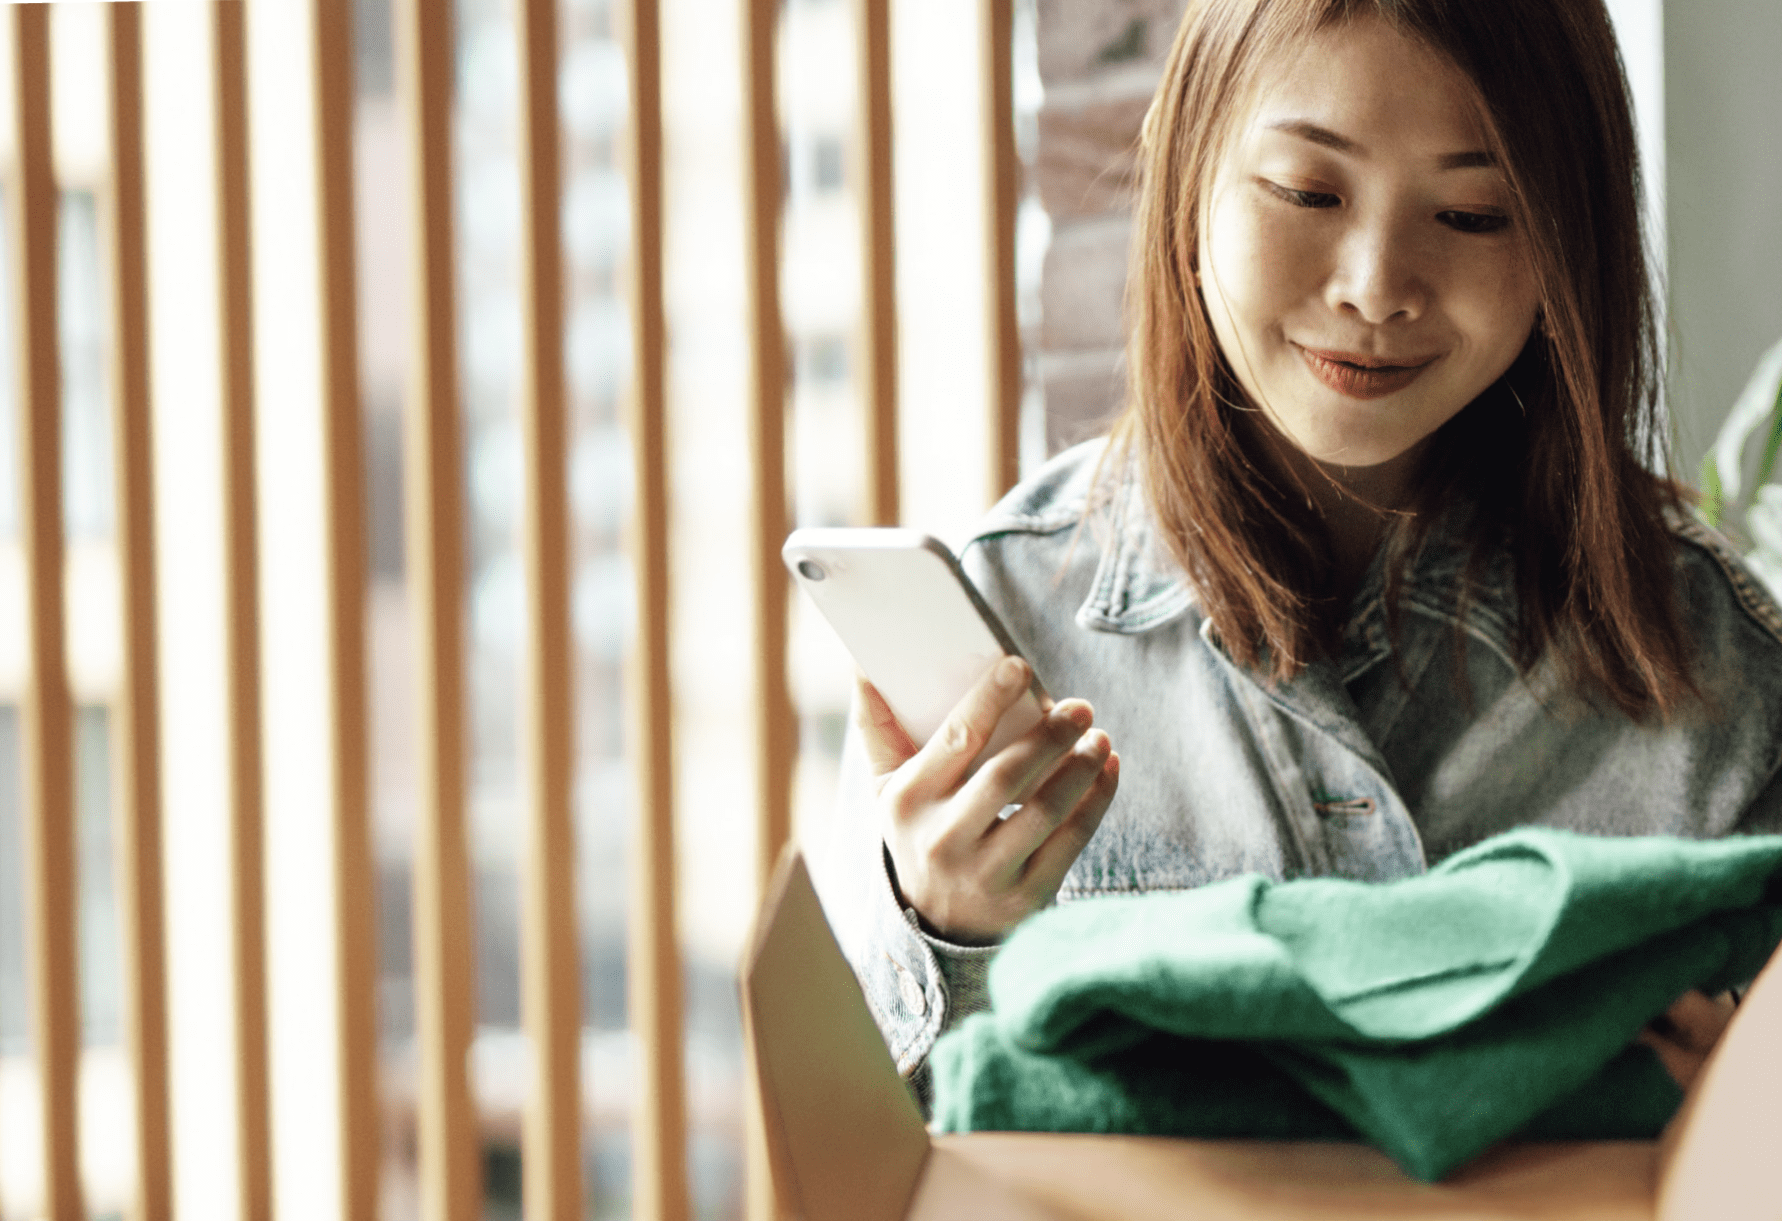 A smiling woman looks at a shipping package while holding her smart phone.